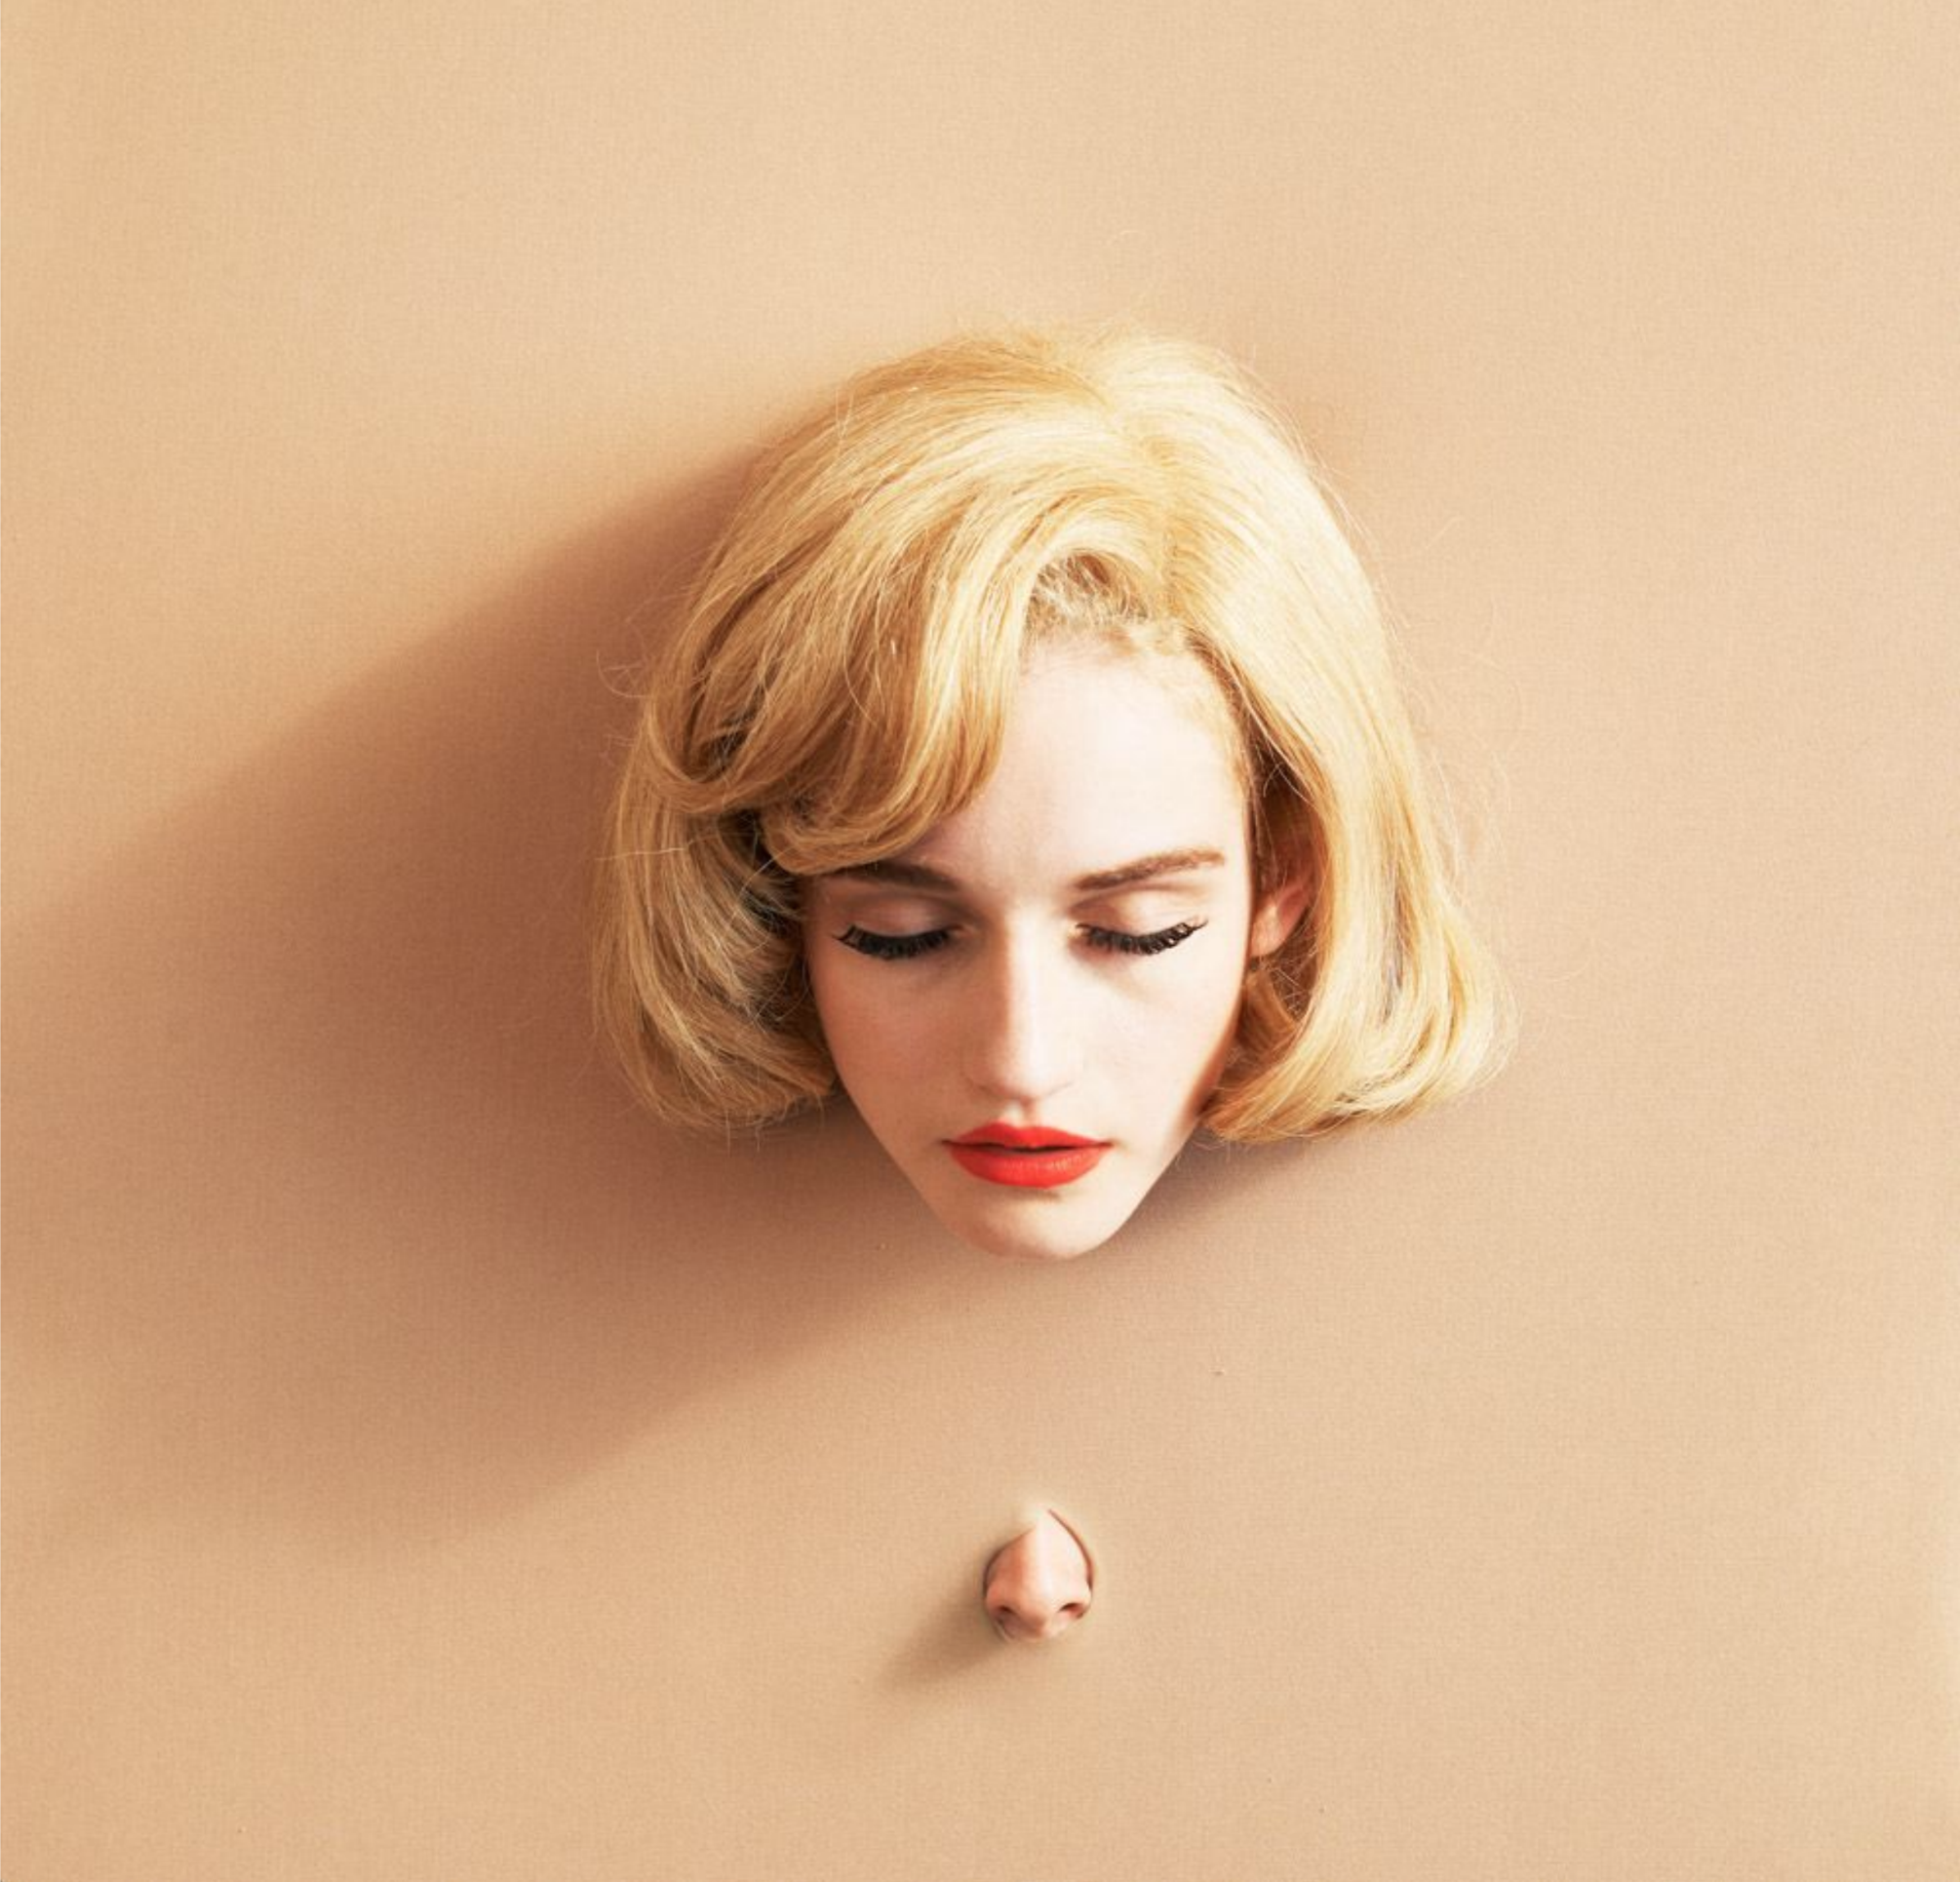 Alex Prager, Untitled (Parts 1), 2014. Archival pigment print, 48 x 50 in. (121.9 x 127 cm). Courtesy of Alex Prager Studio and Lehmann Maupin, New York, Hong Kong, Seoul, and London. © Alex Prager.